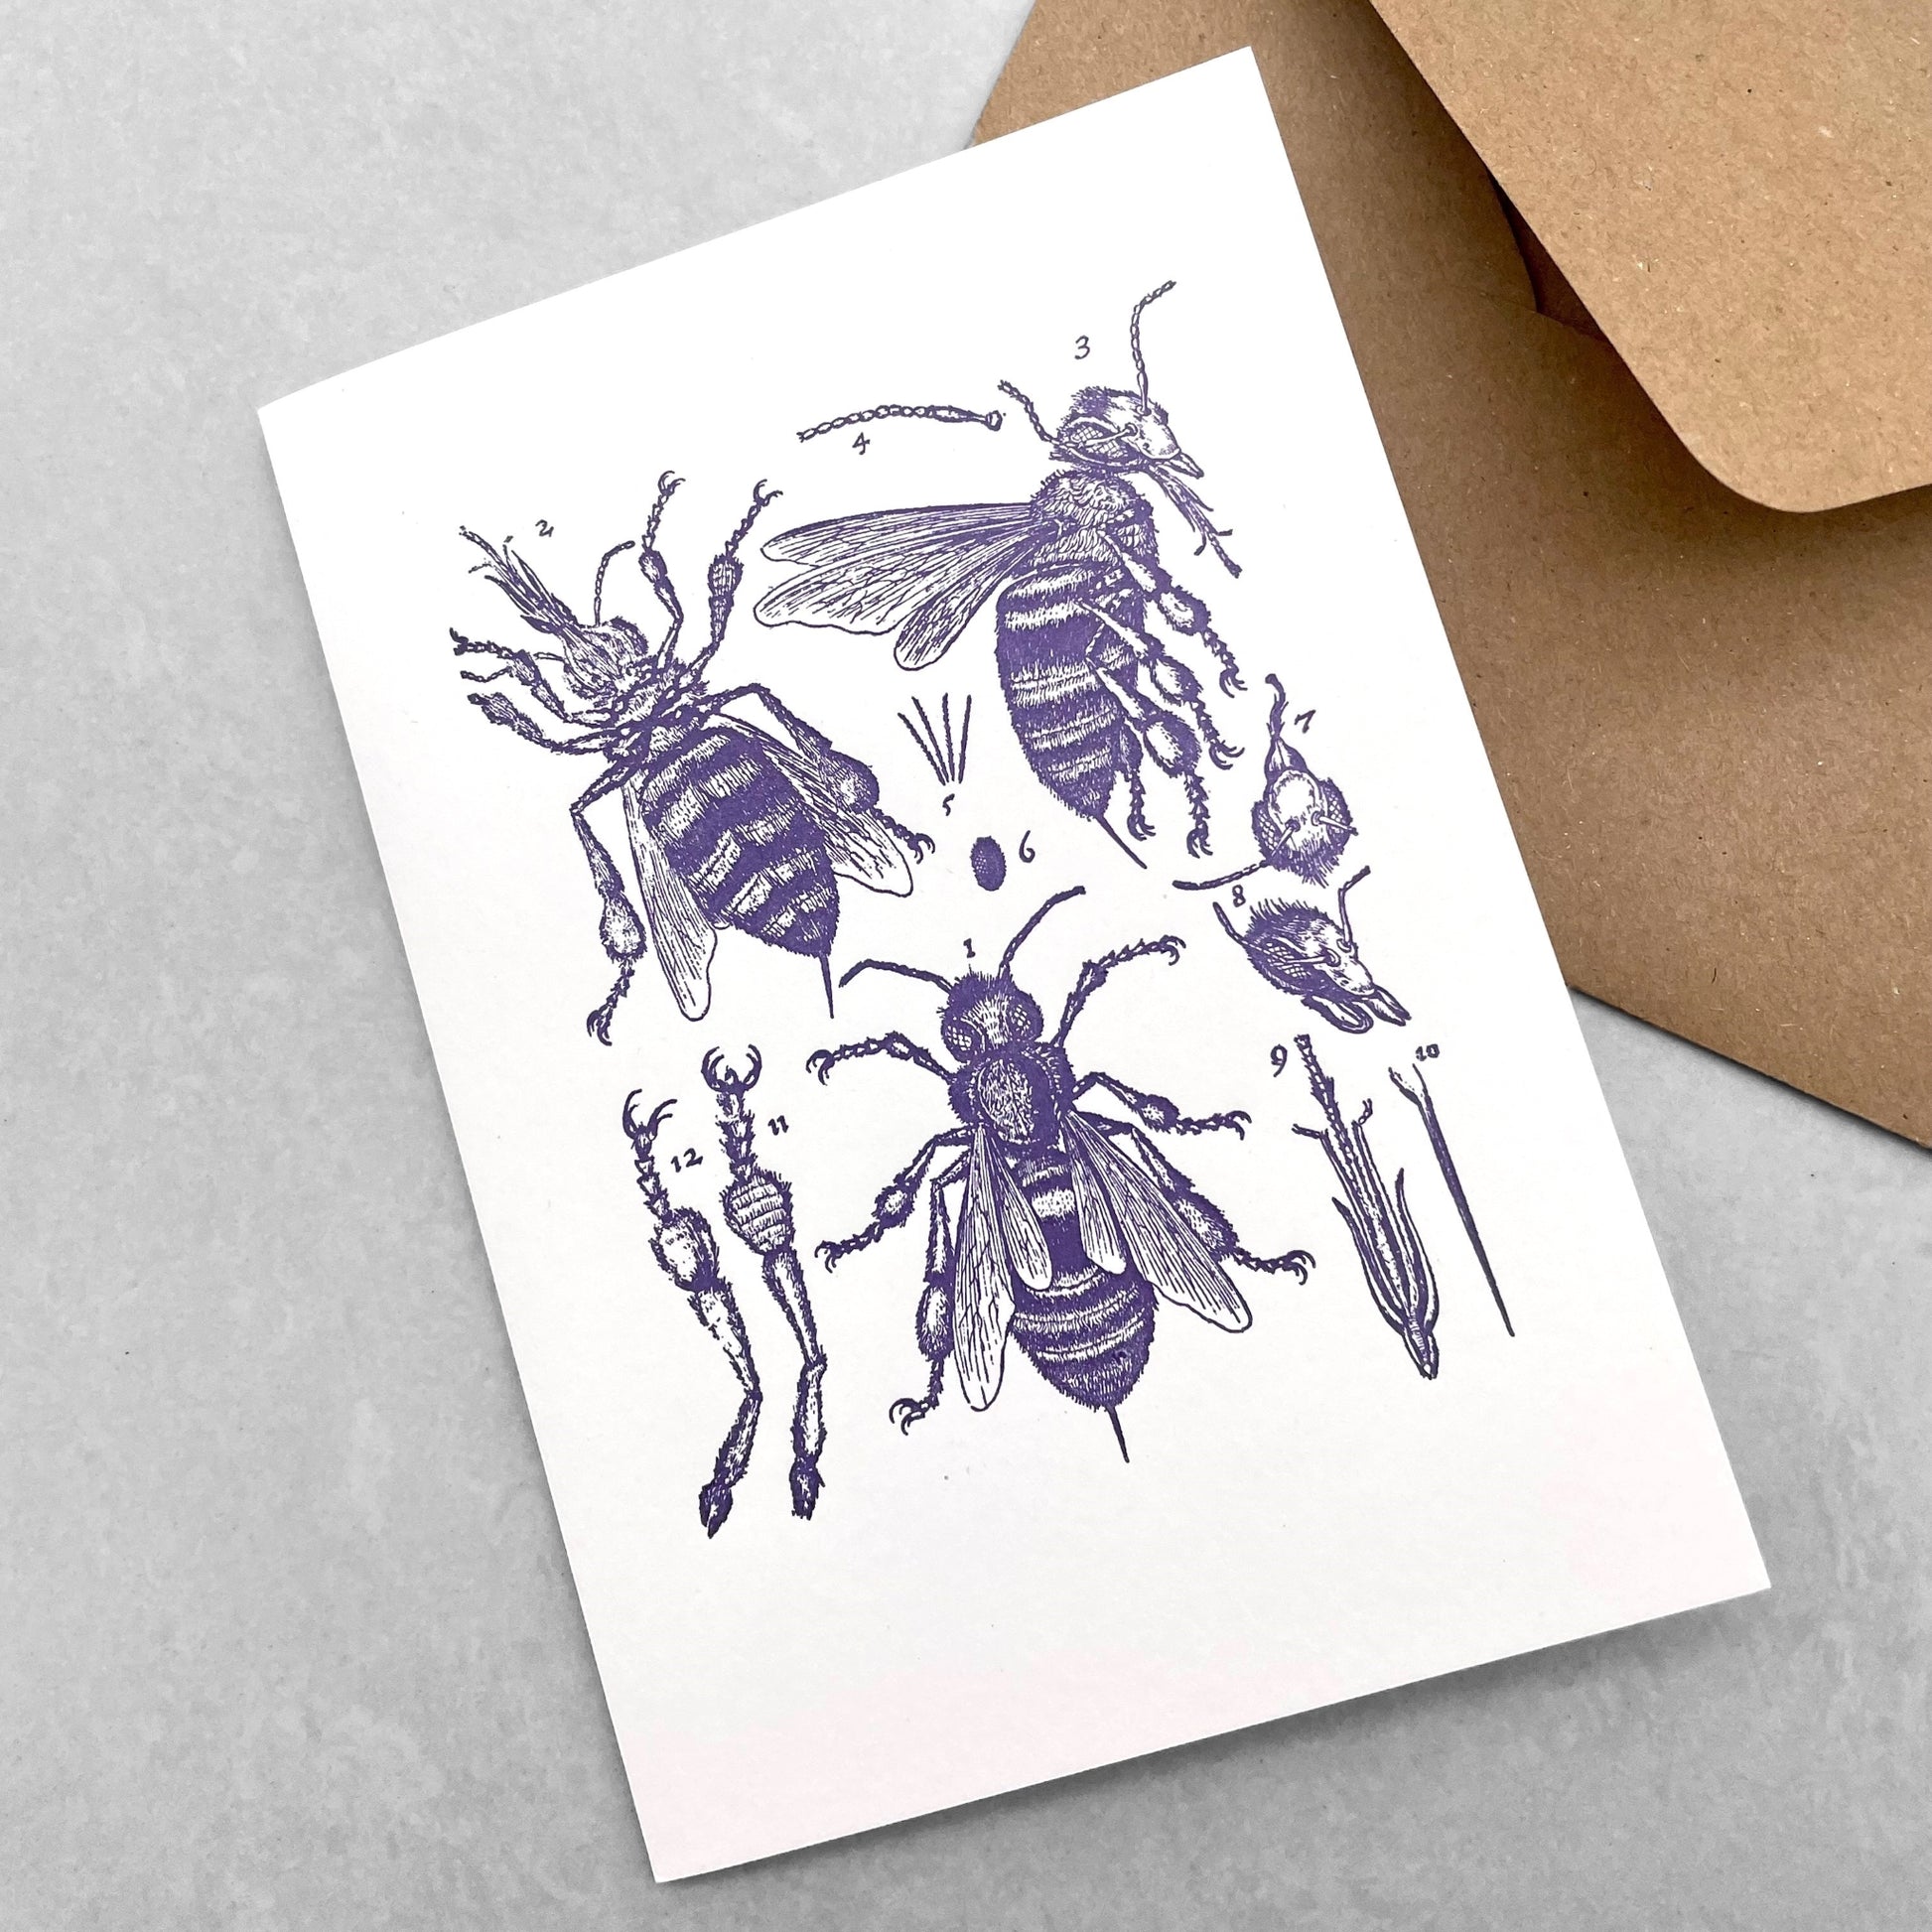 letterpress greetings card of a drawing of the anatomy of a bee, dark blue ink on white by the Passenger Press